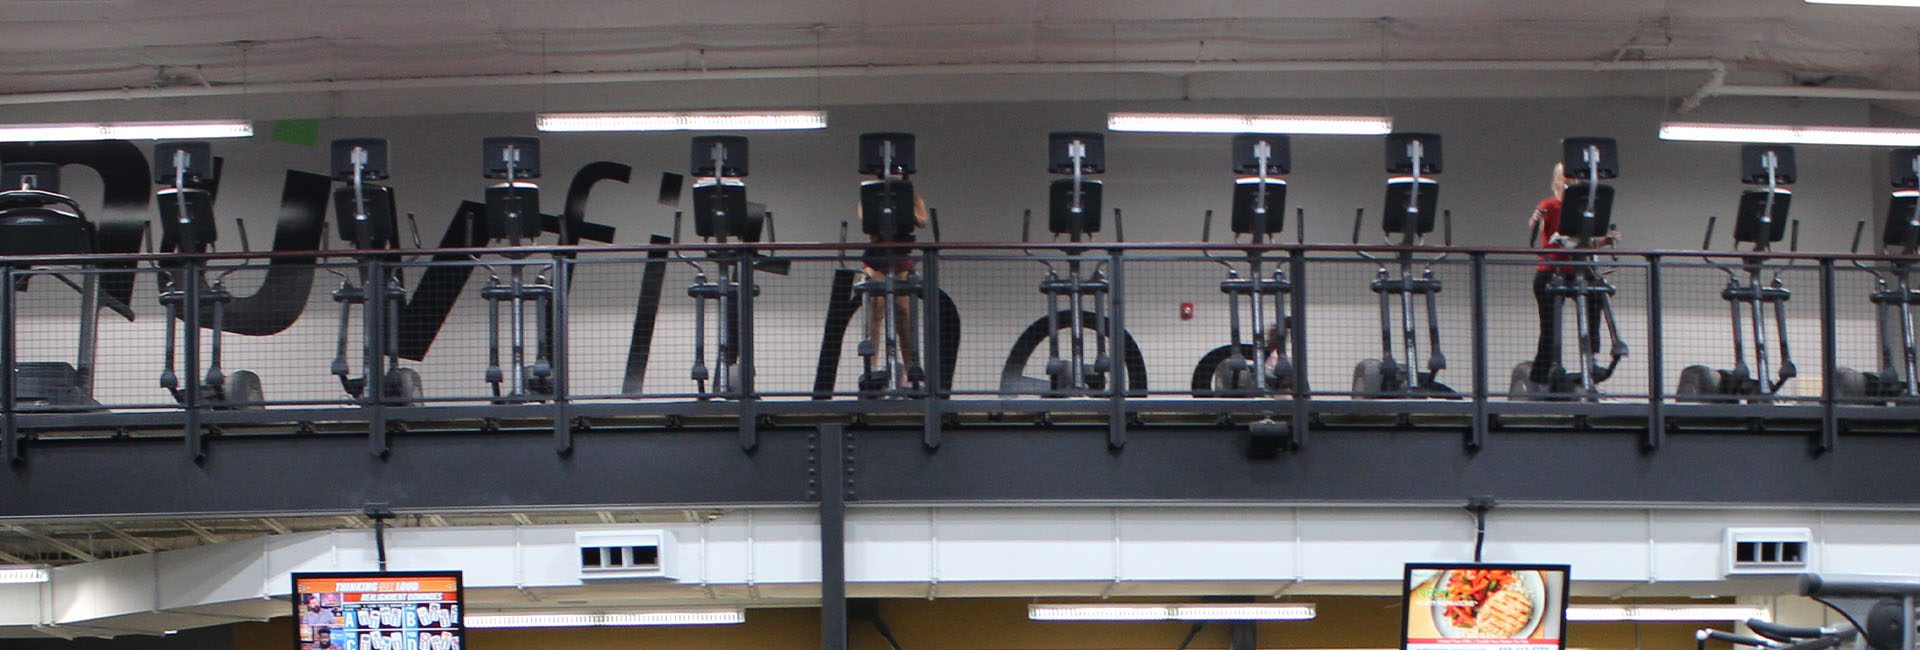 rows of cardio machines in gym near me